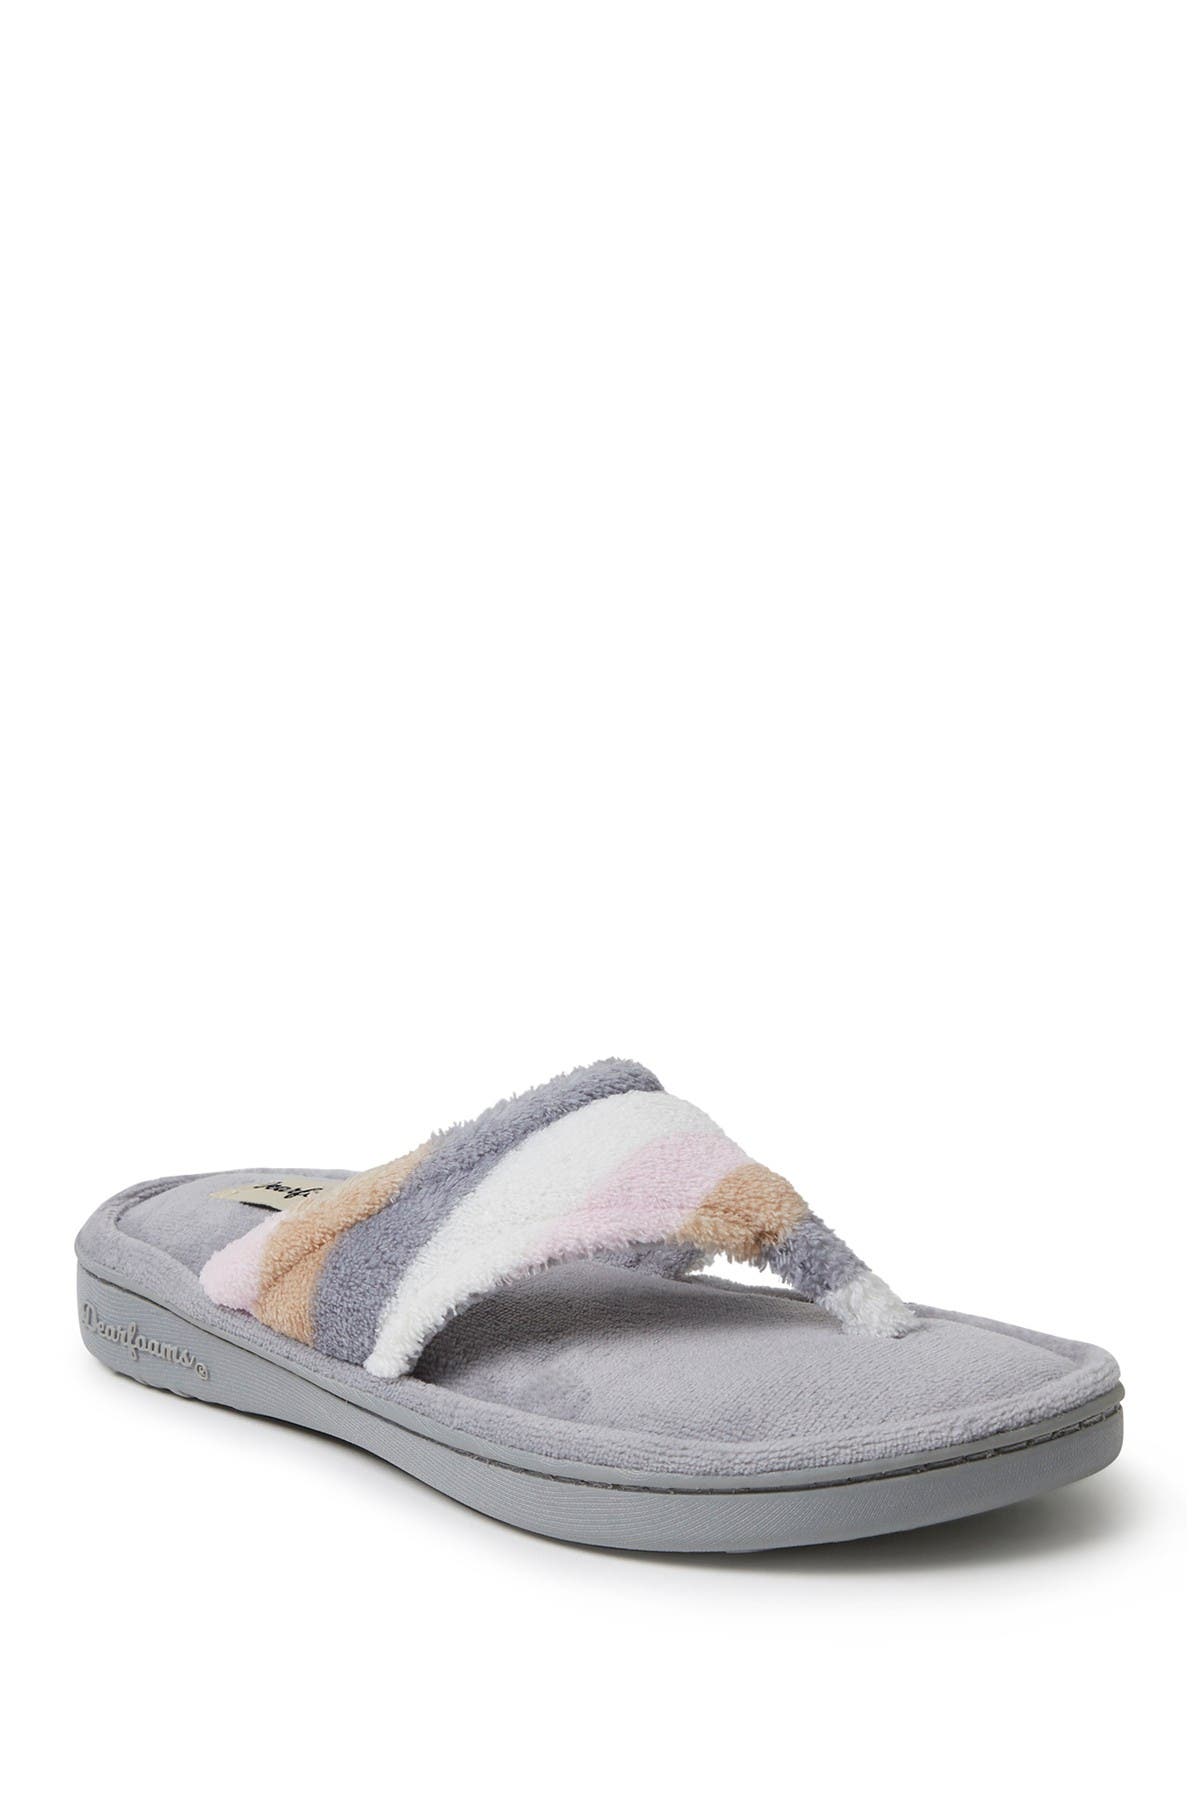 terry cloth slippers